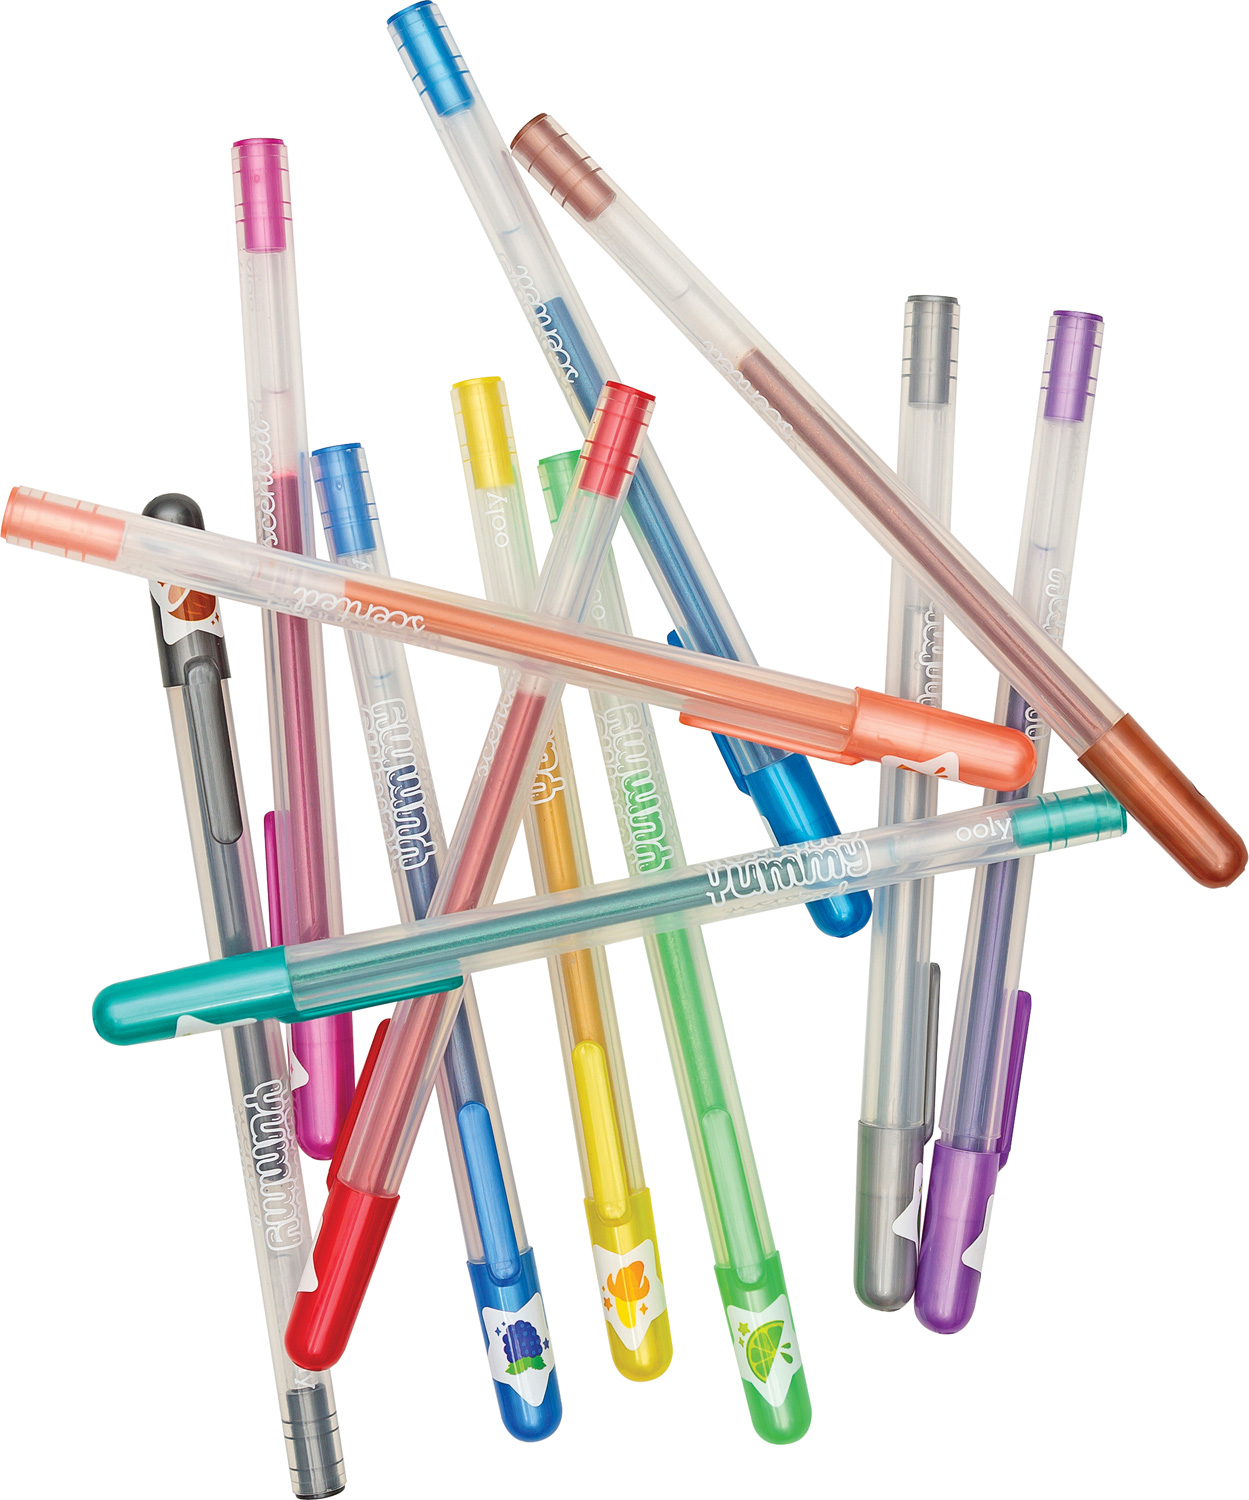 Yummy Yummy Scented Glitter Gel Pens - Set of 12 (Other) 